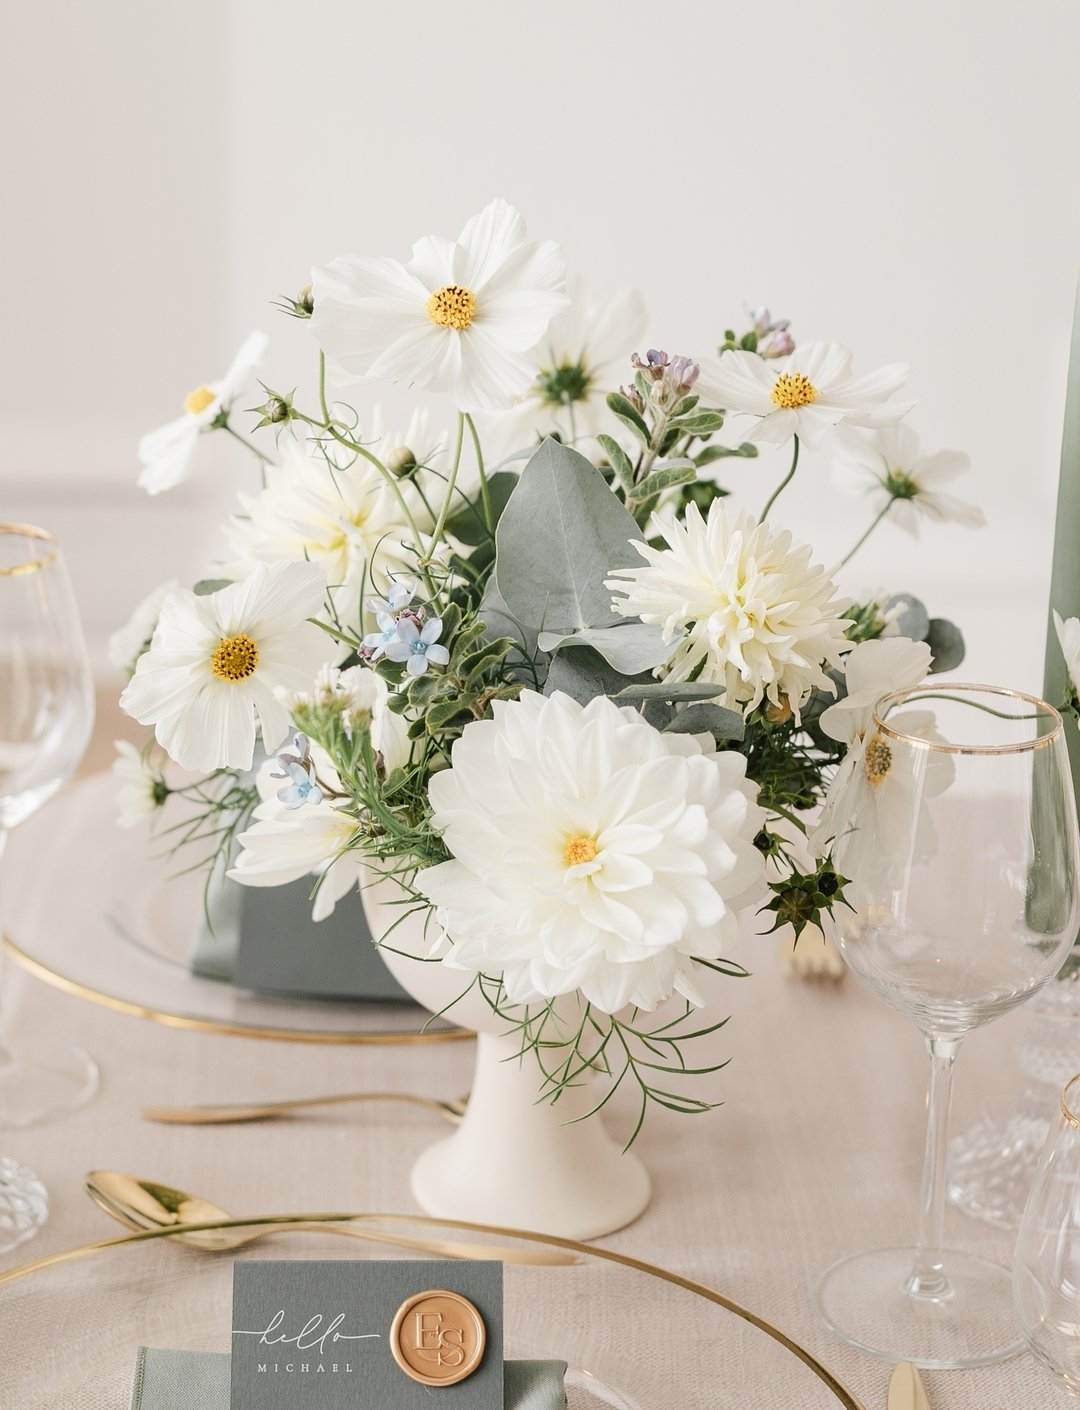 Effortless greens and whites in this stunning table display from @auroranyxfloraldesign will this classic colour combo ever go out of fashion? We really don't think so!